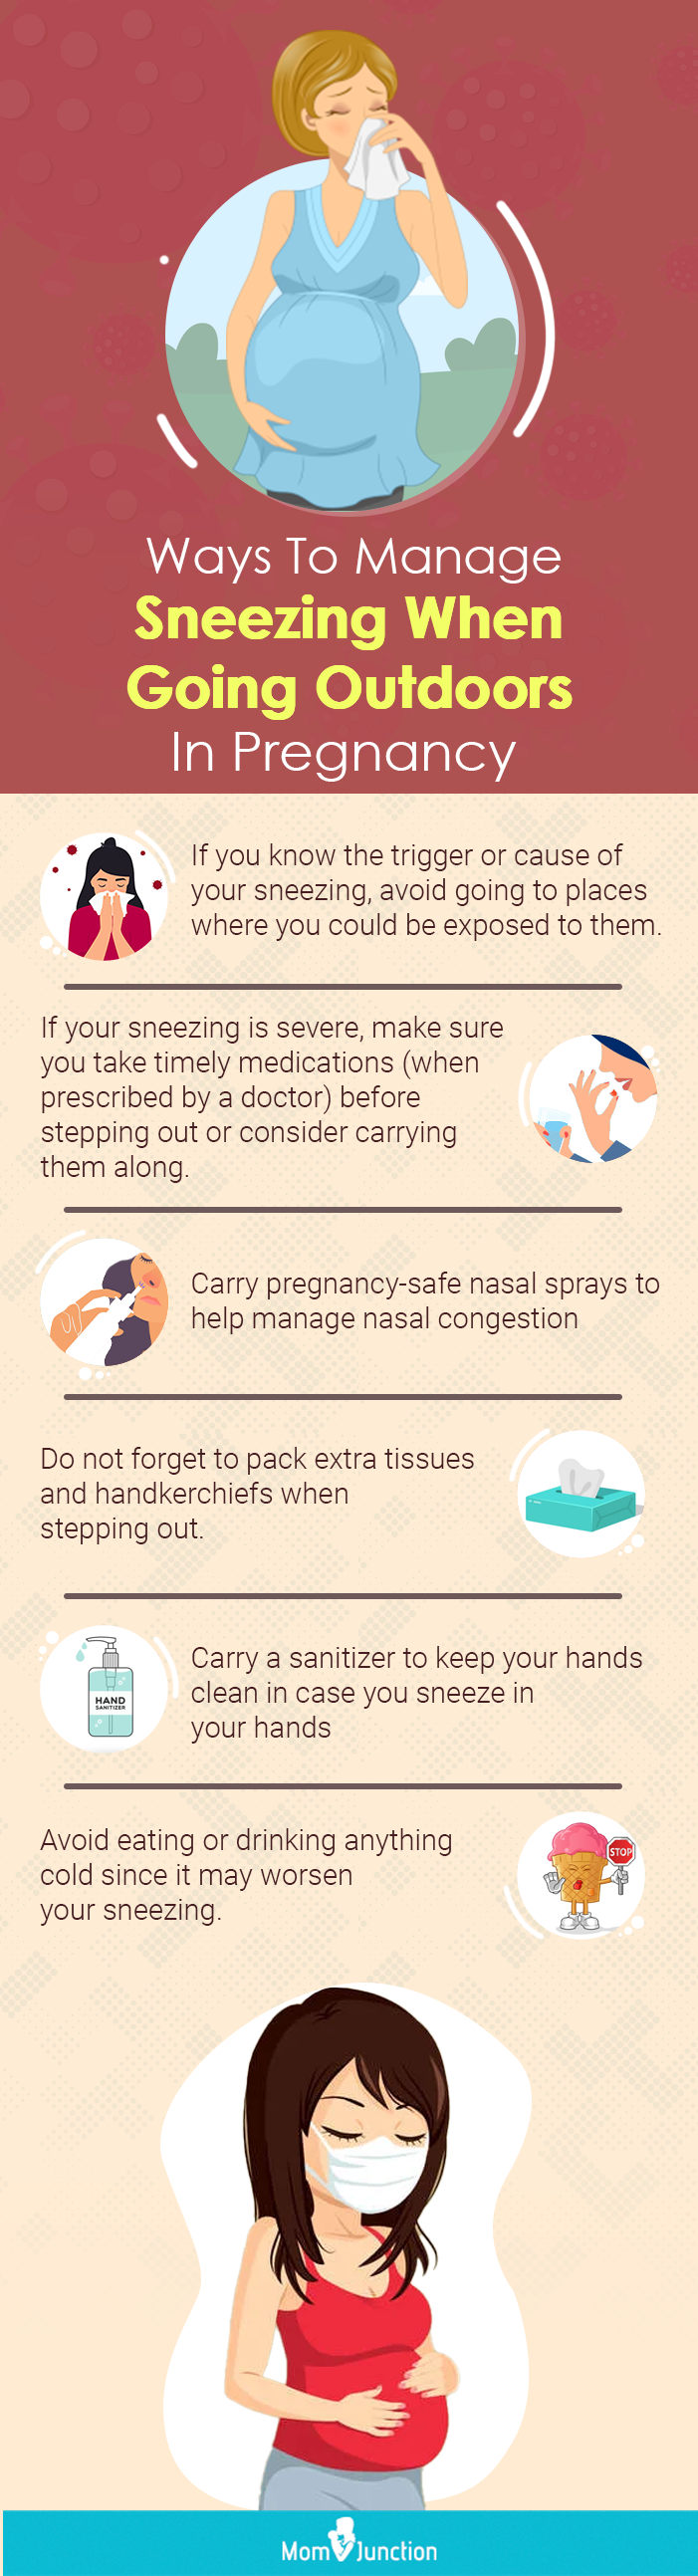 ways to manage sneezing when going outdoors in pregnancy (infographic)